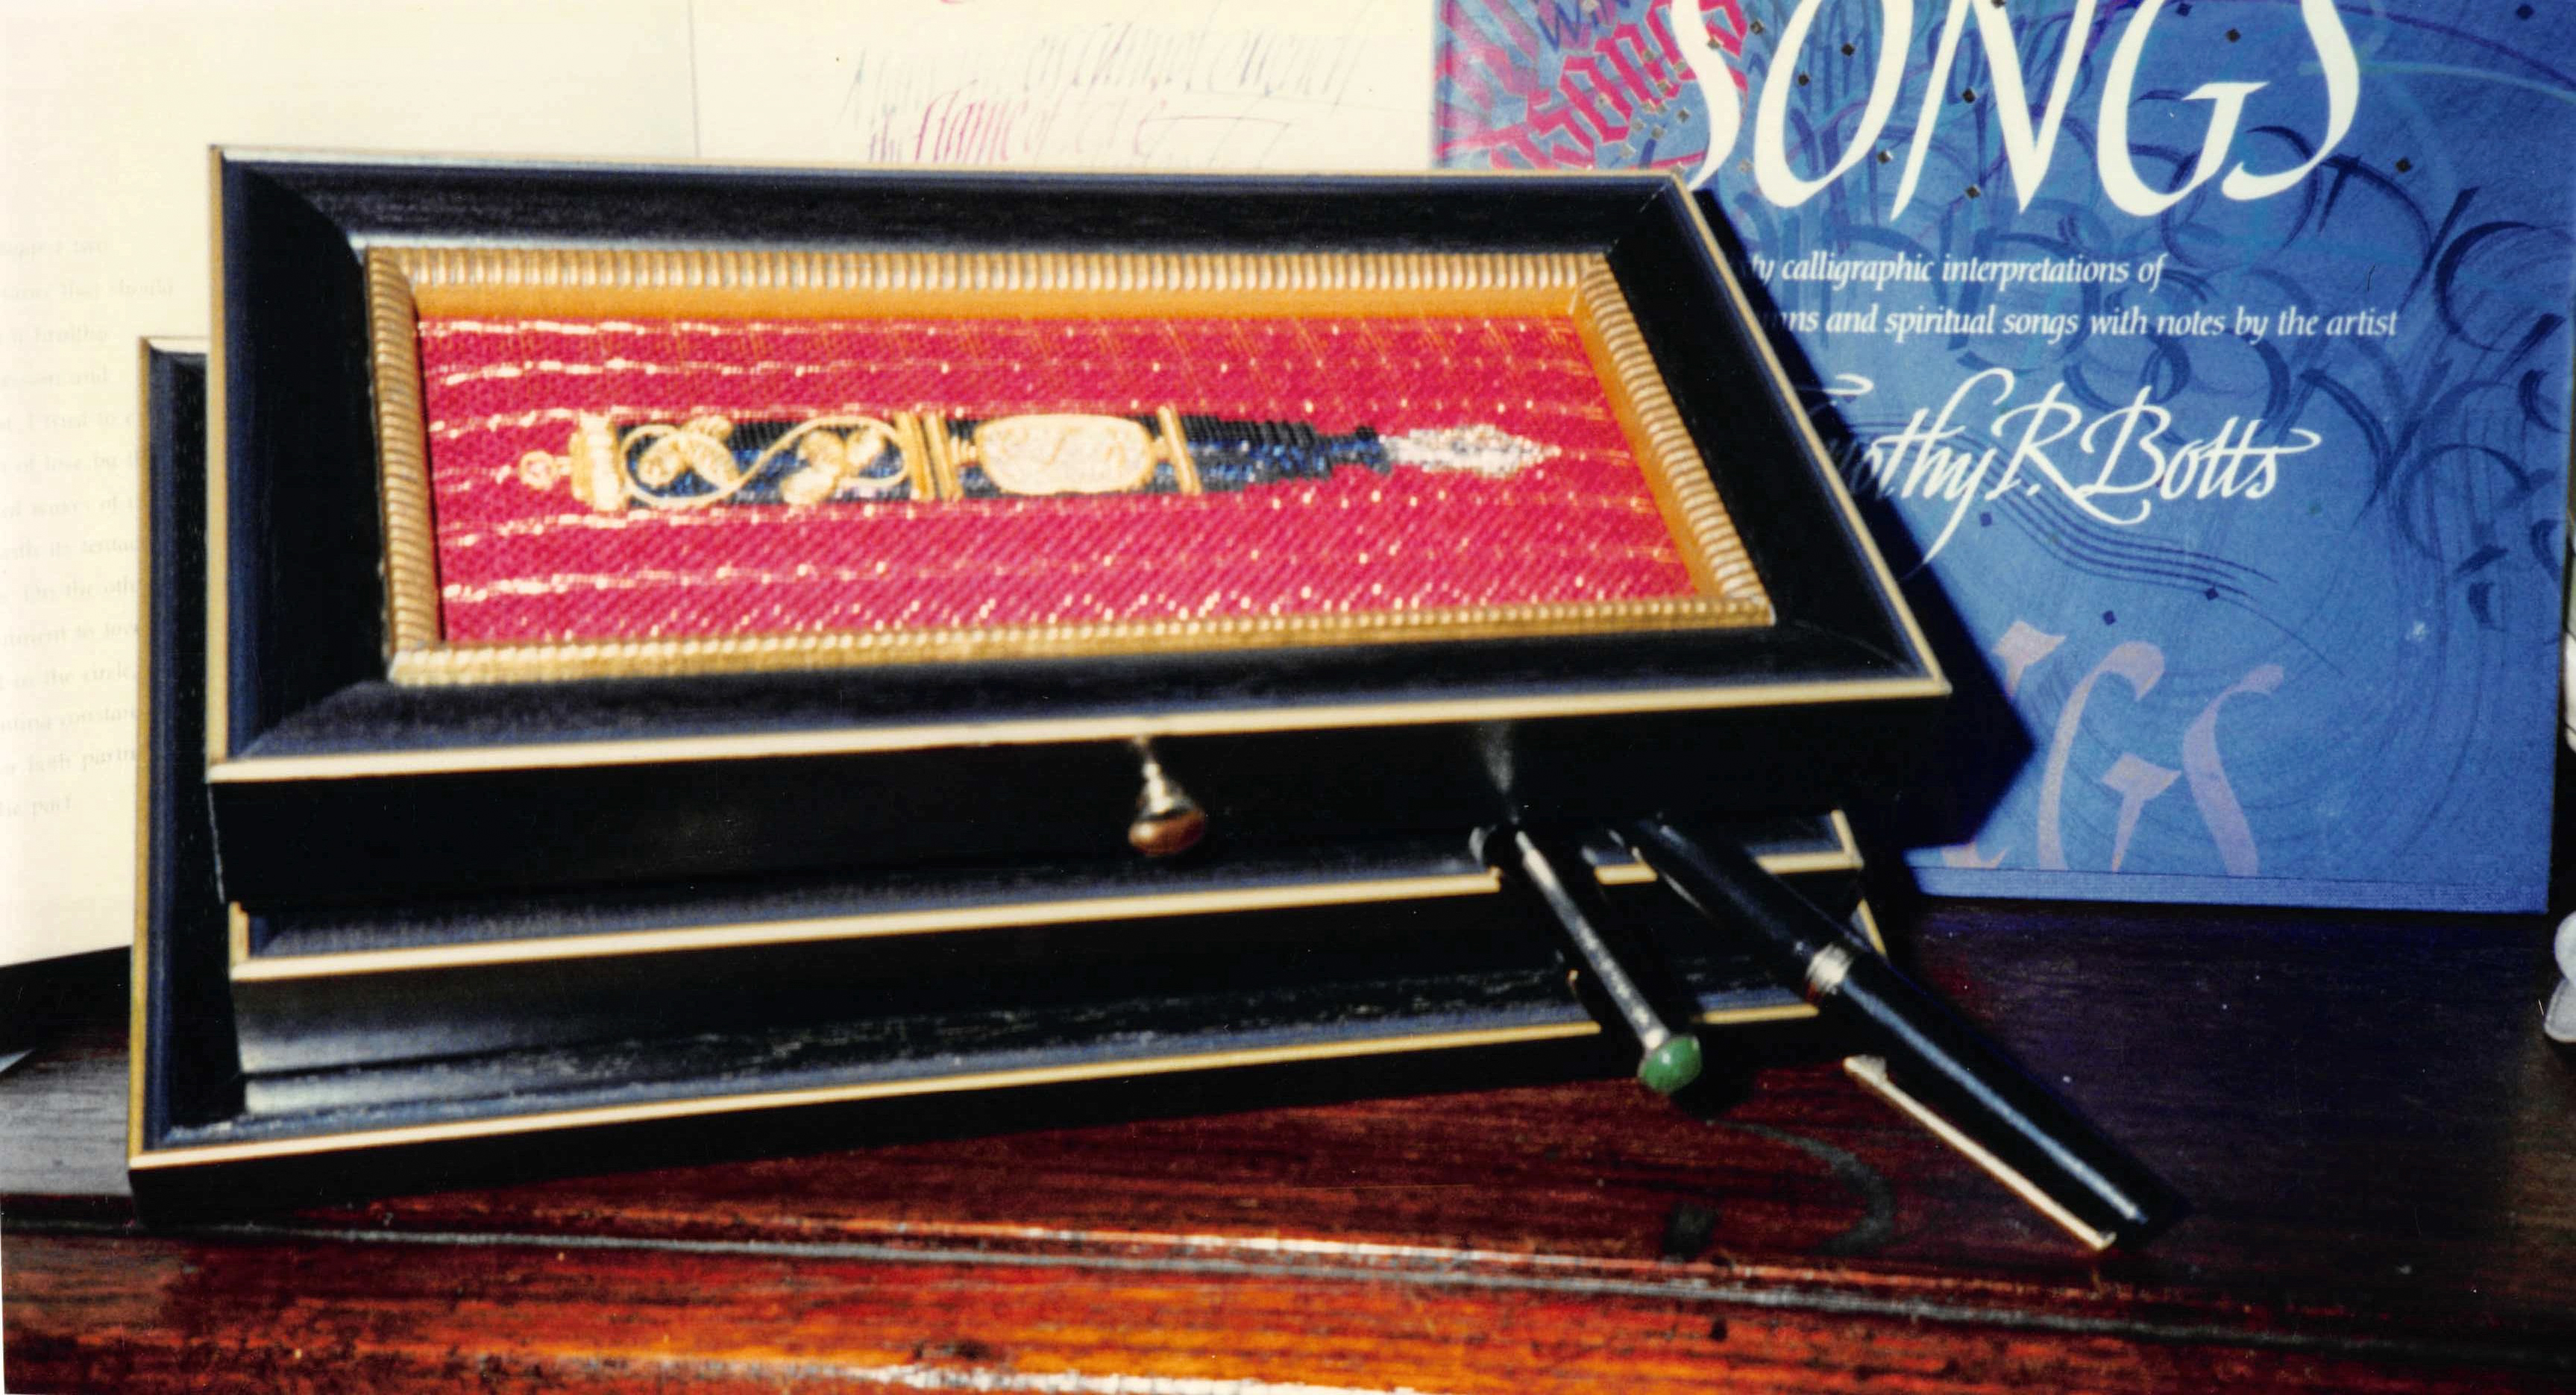 Custom build pen box made with frames. Opens and closes with lined interior for pens